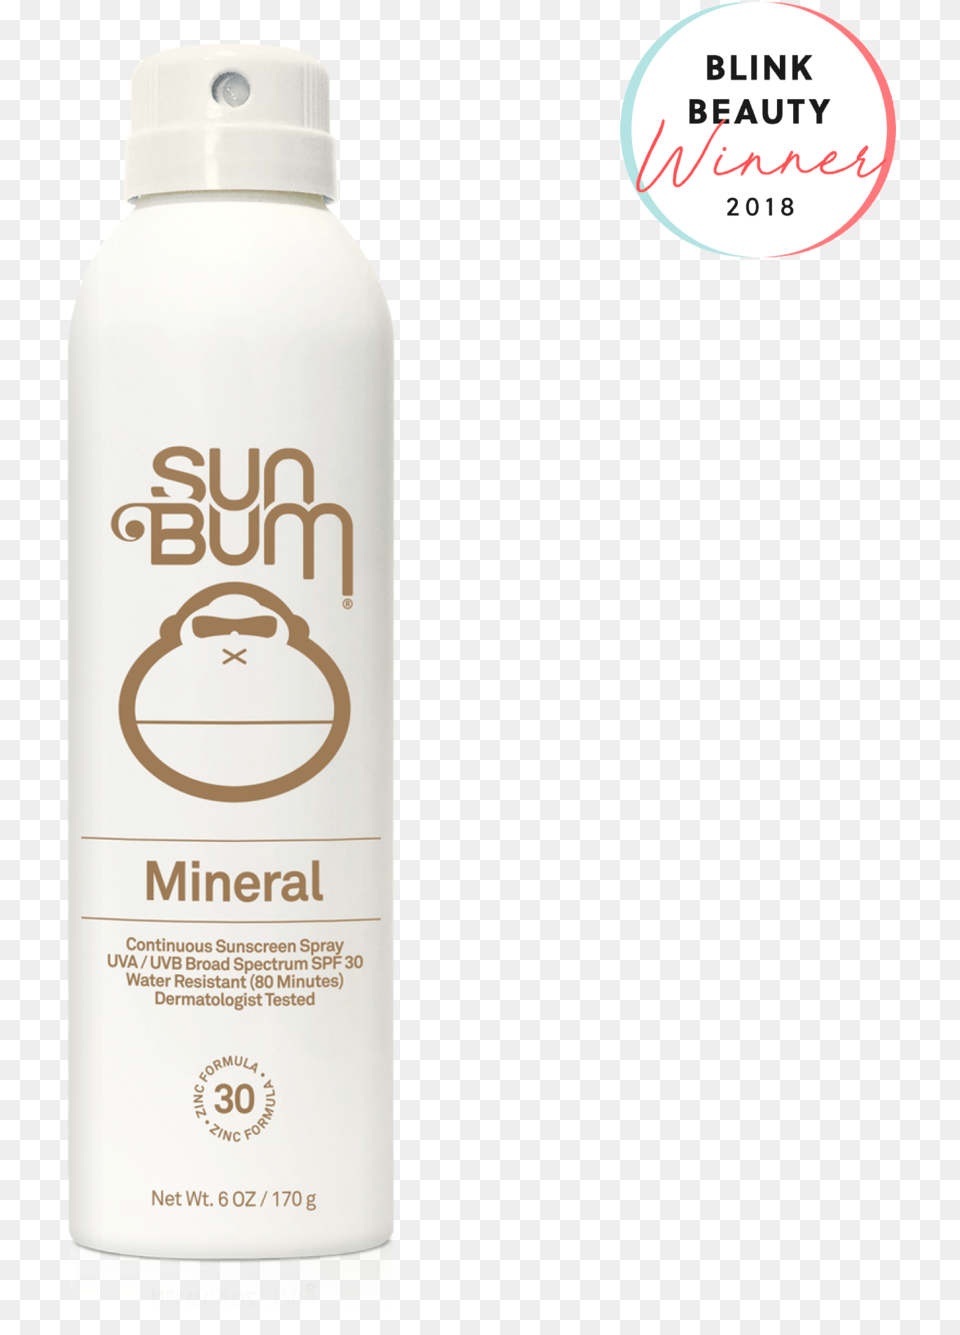 Sun Bum Mineral Sunscreen Spray, Bottle, Cosmetics, Shaker Free Png Download